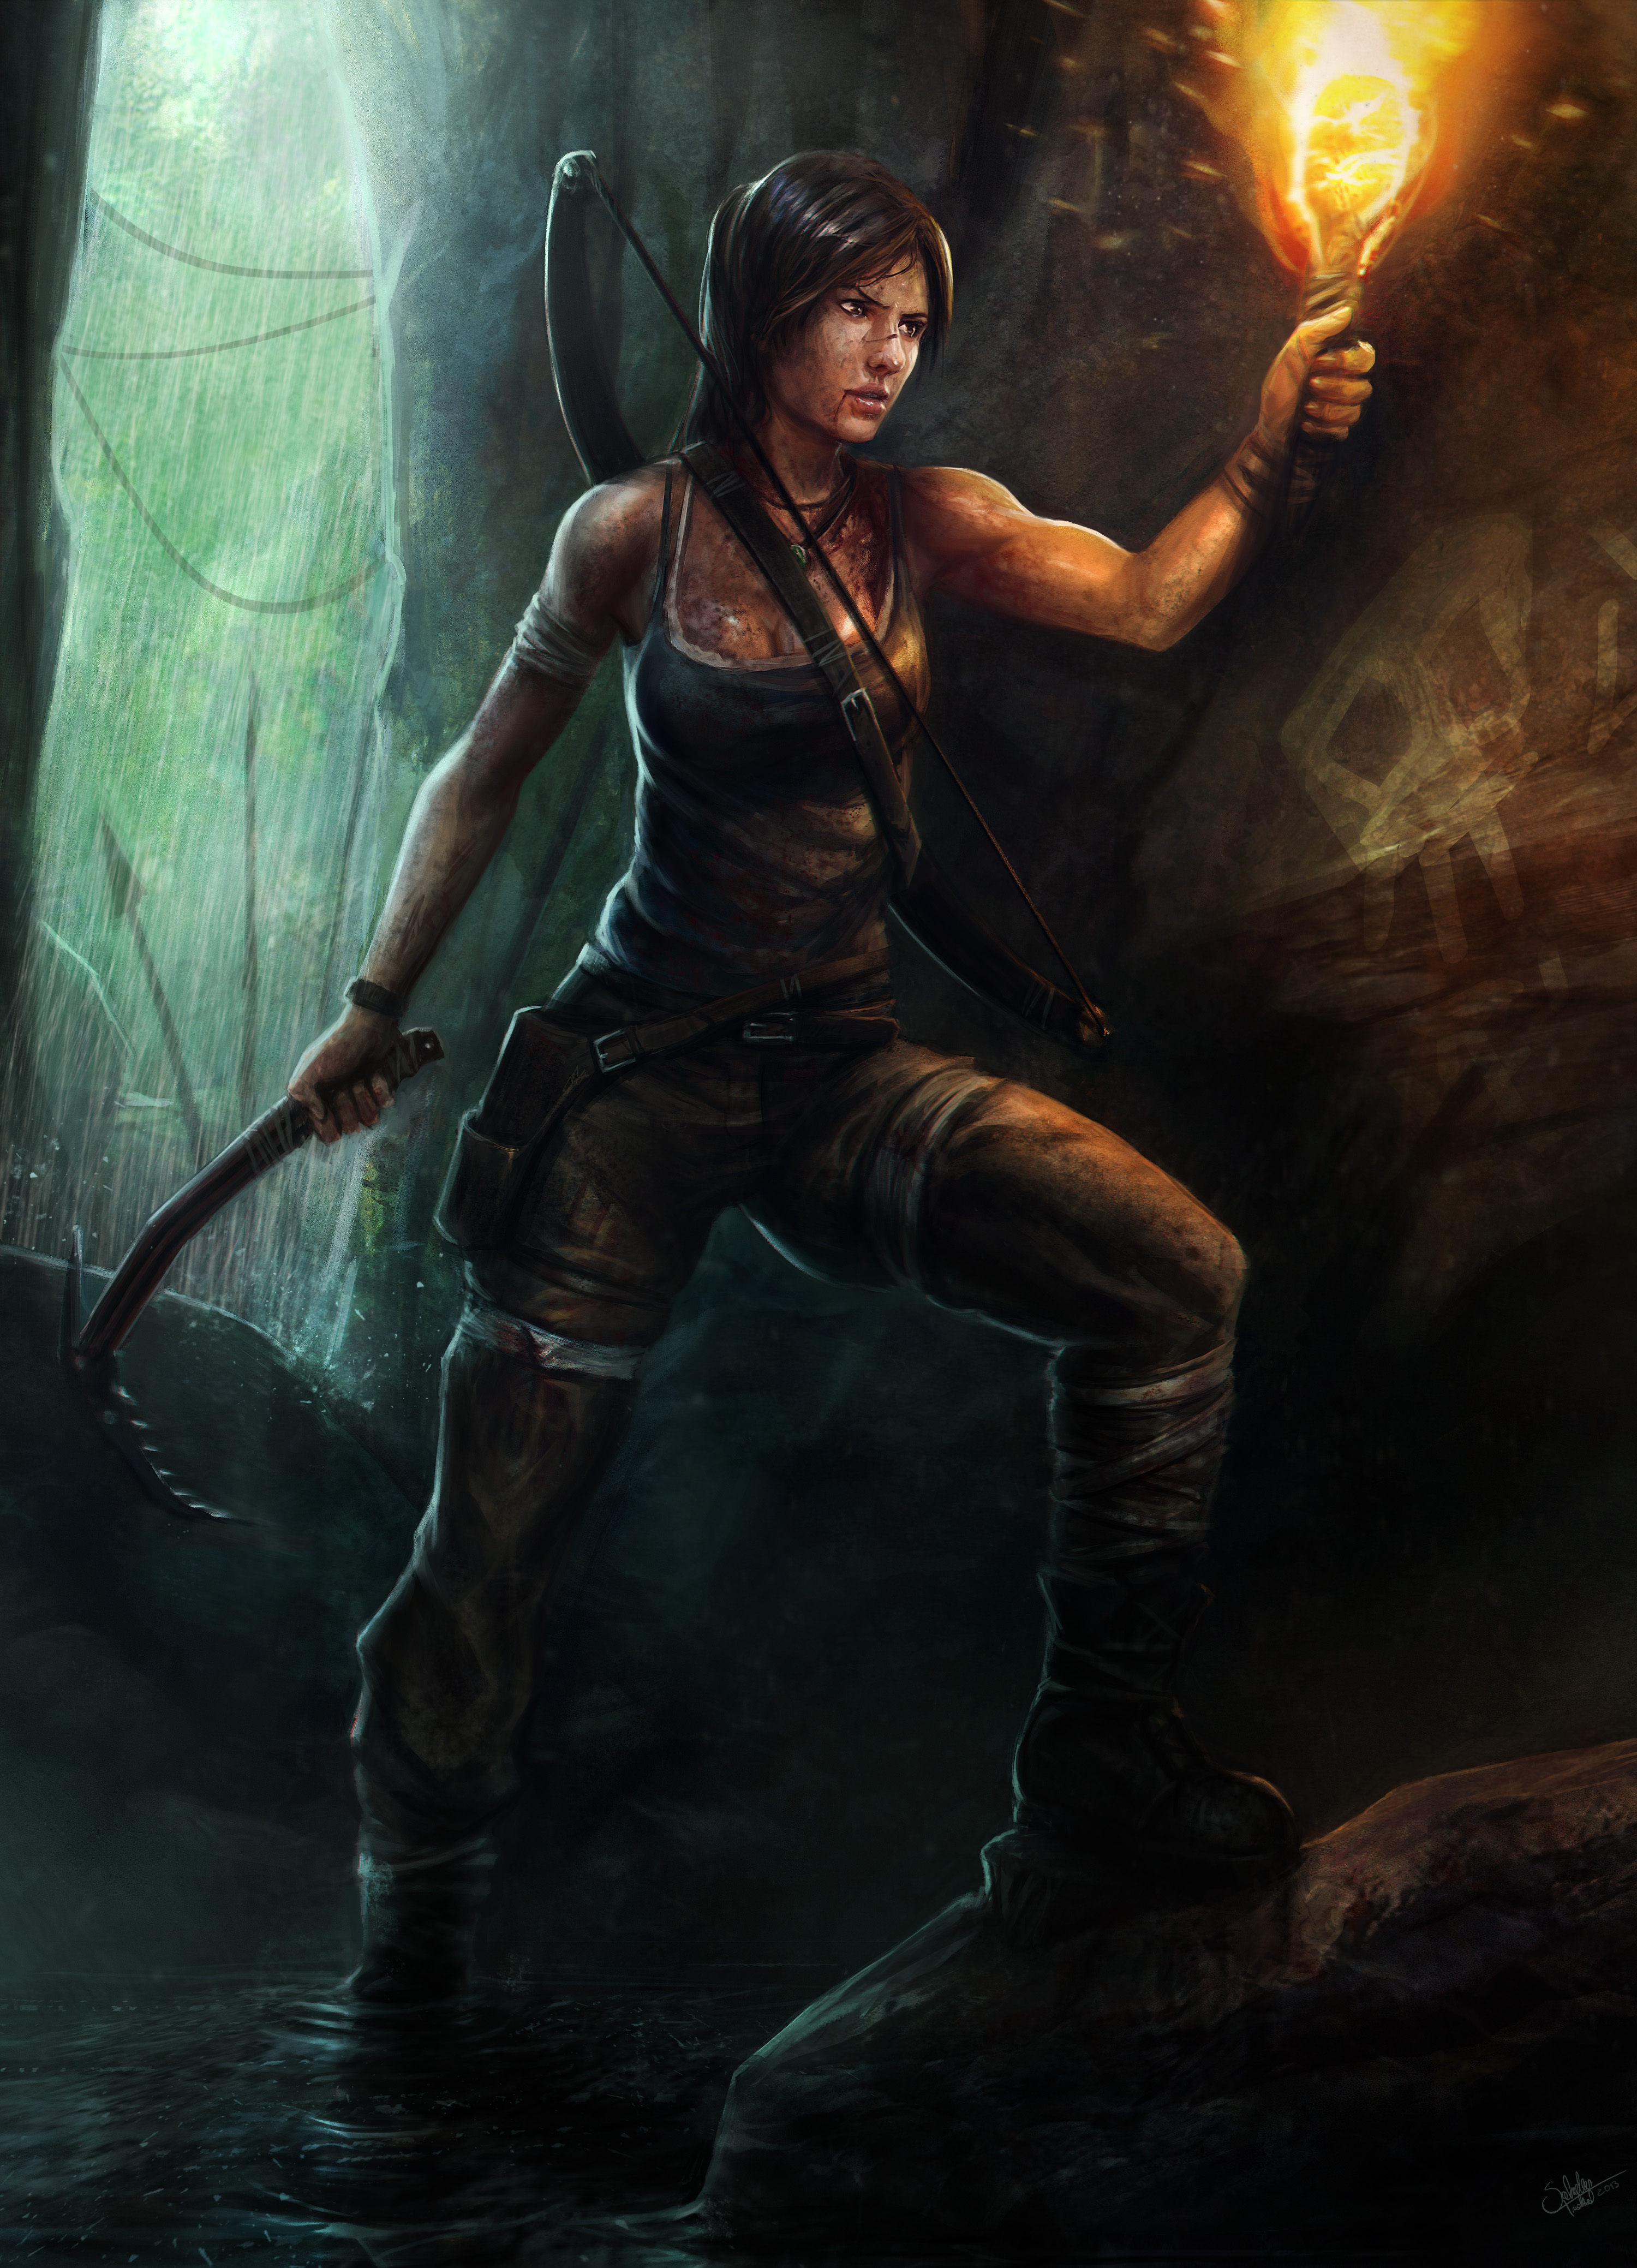 tomb_raider_contest_entry_by_saturnoarg-